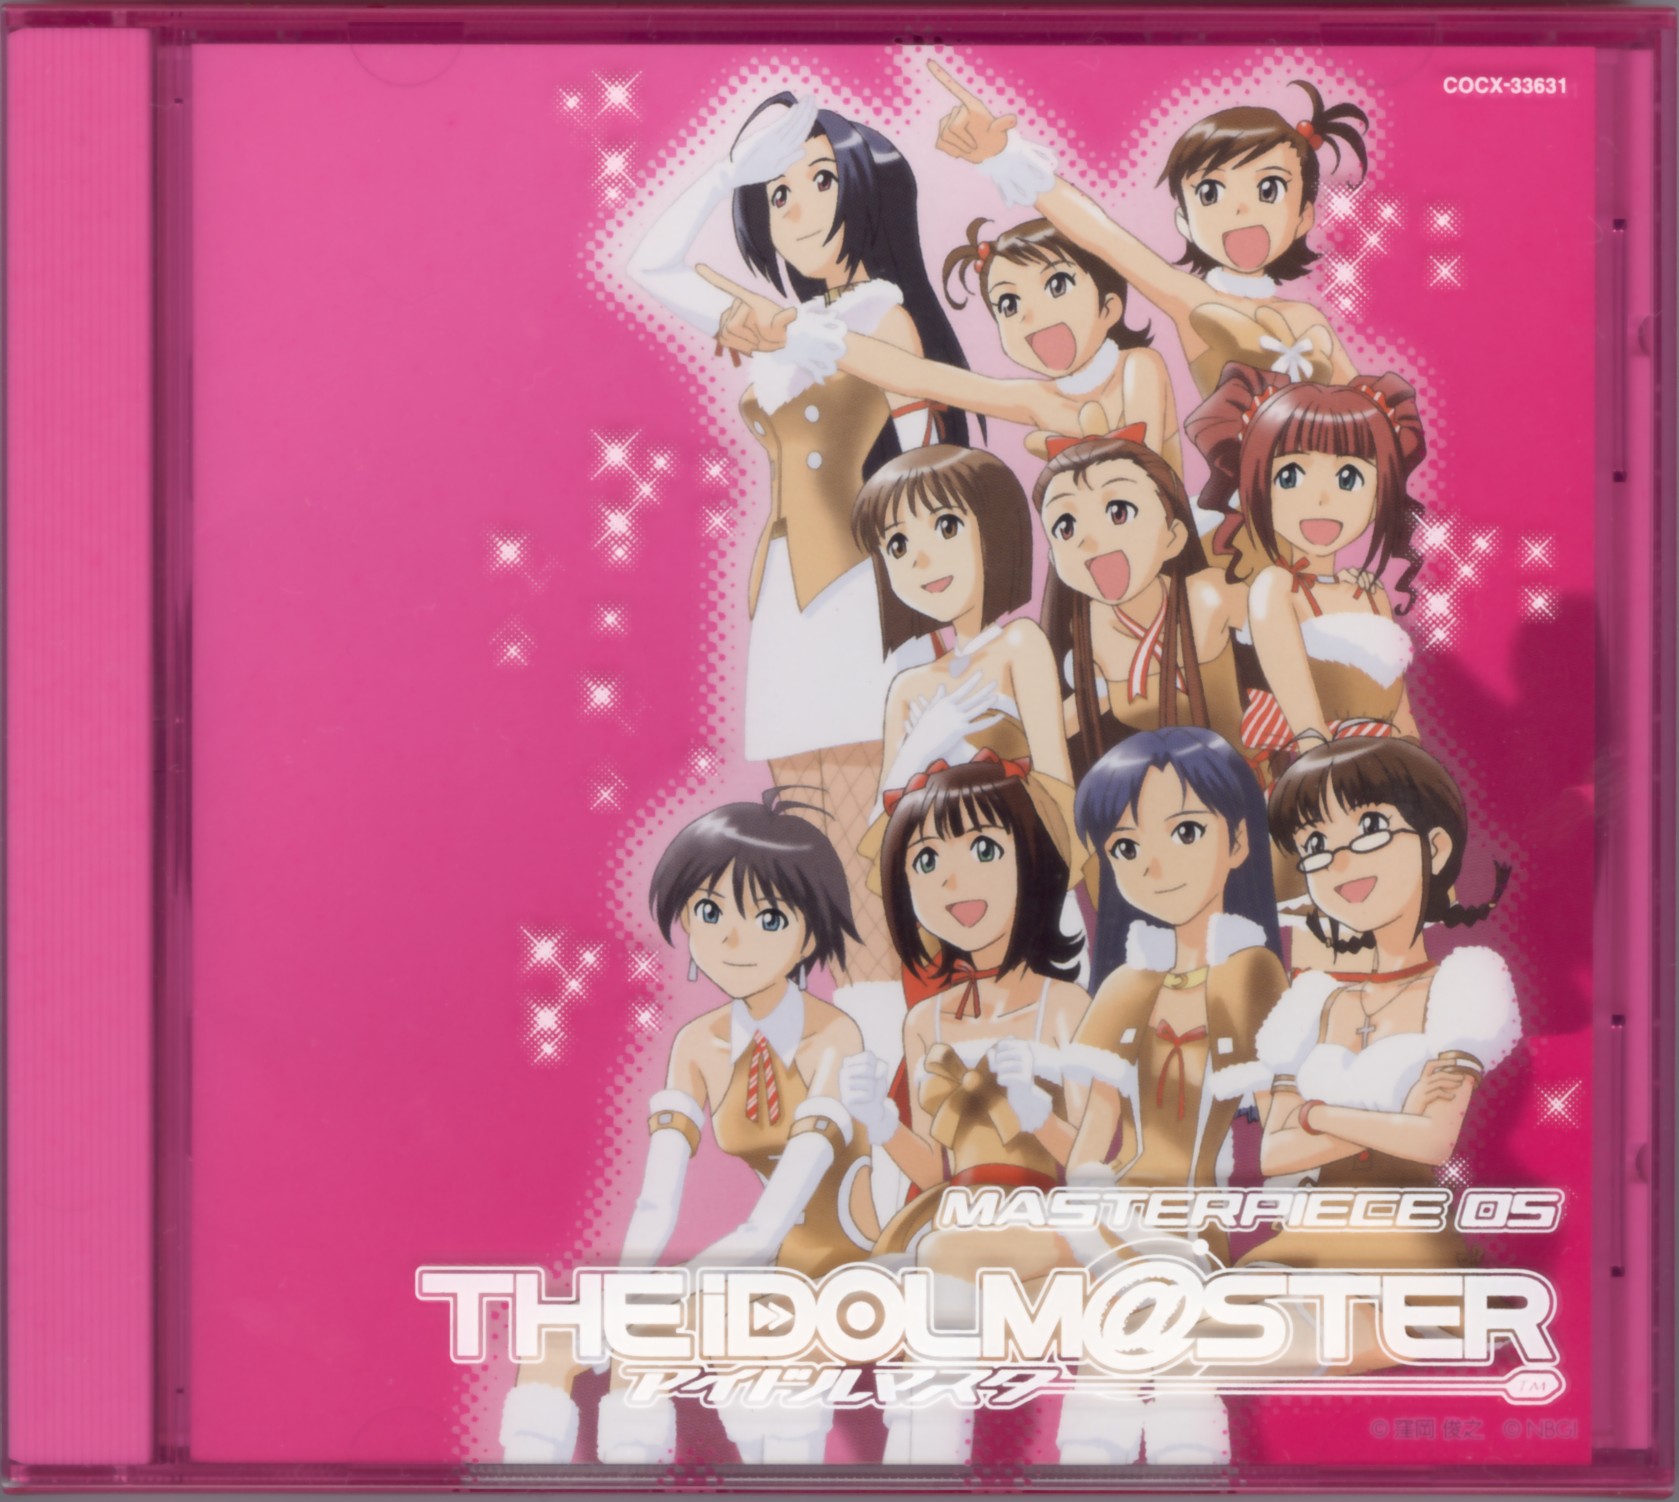 Release “THE iDOLM@STER MASTERPIECE 05” by 天海春香、如月千早